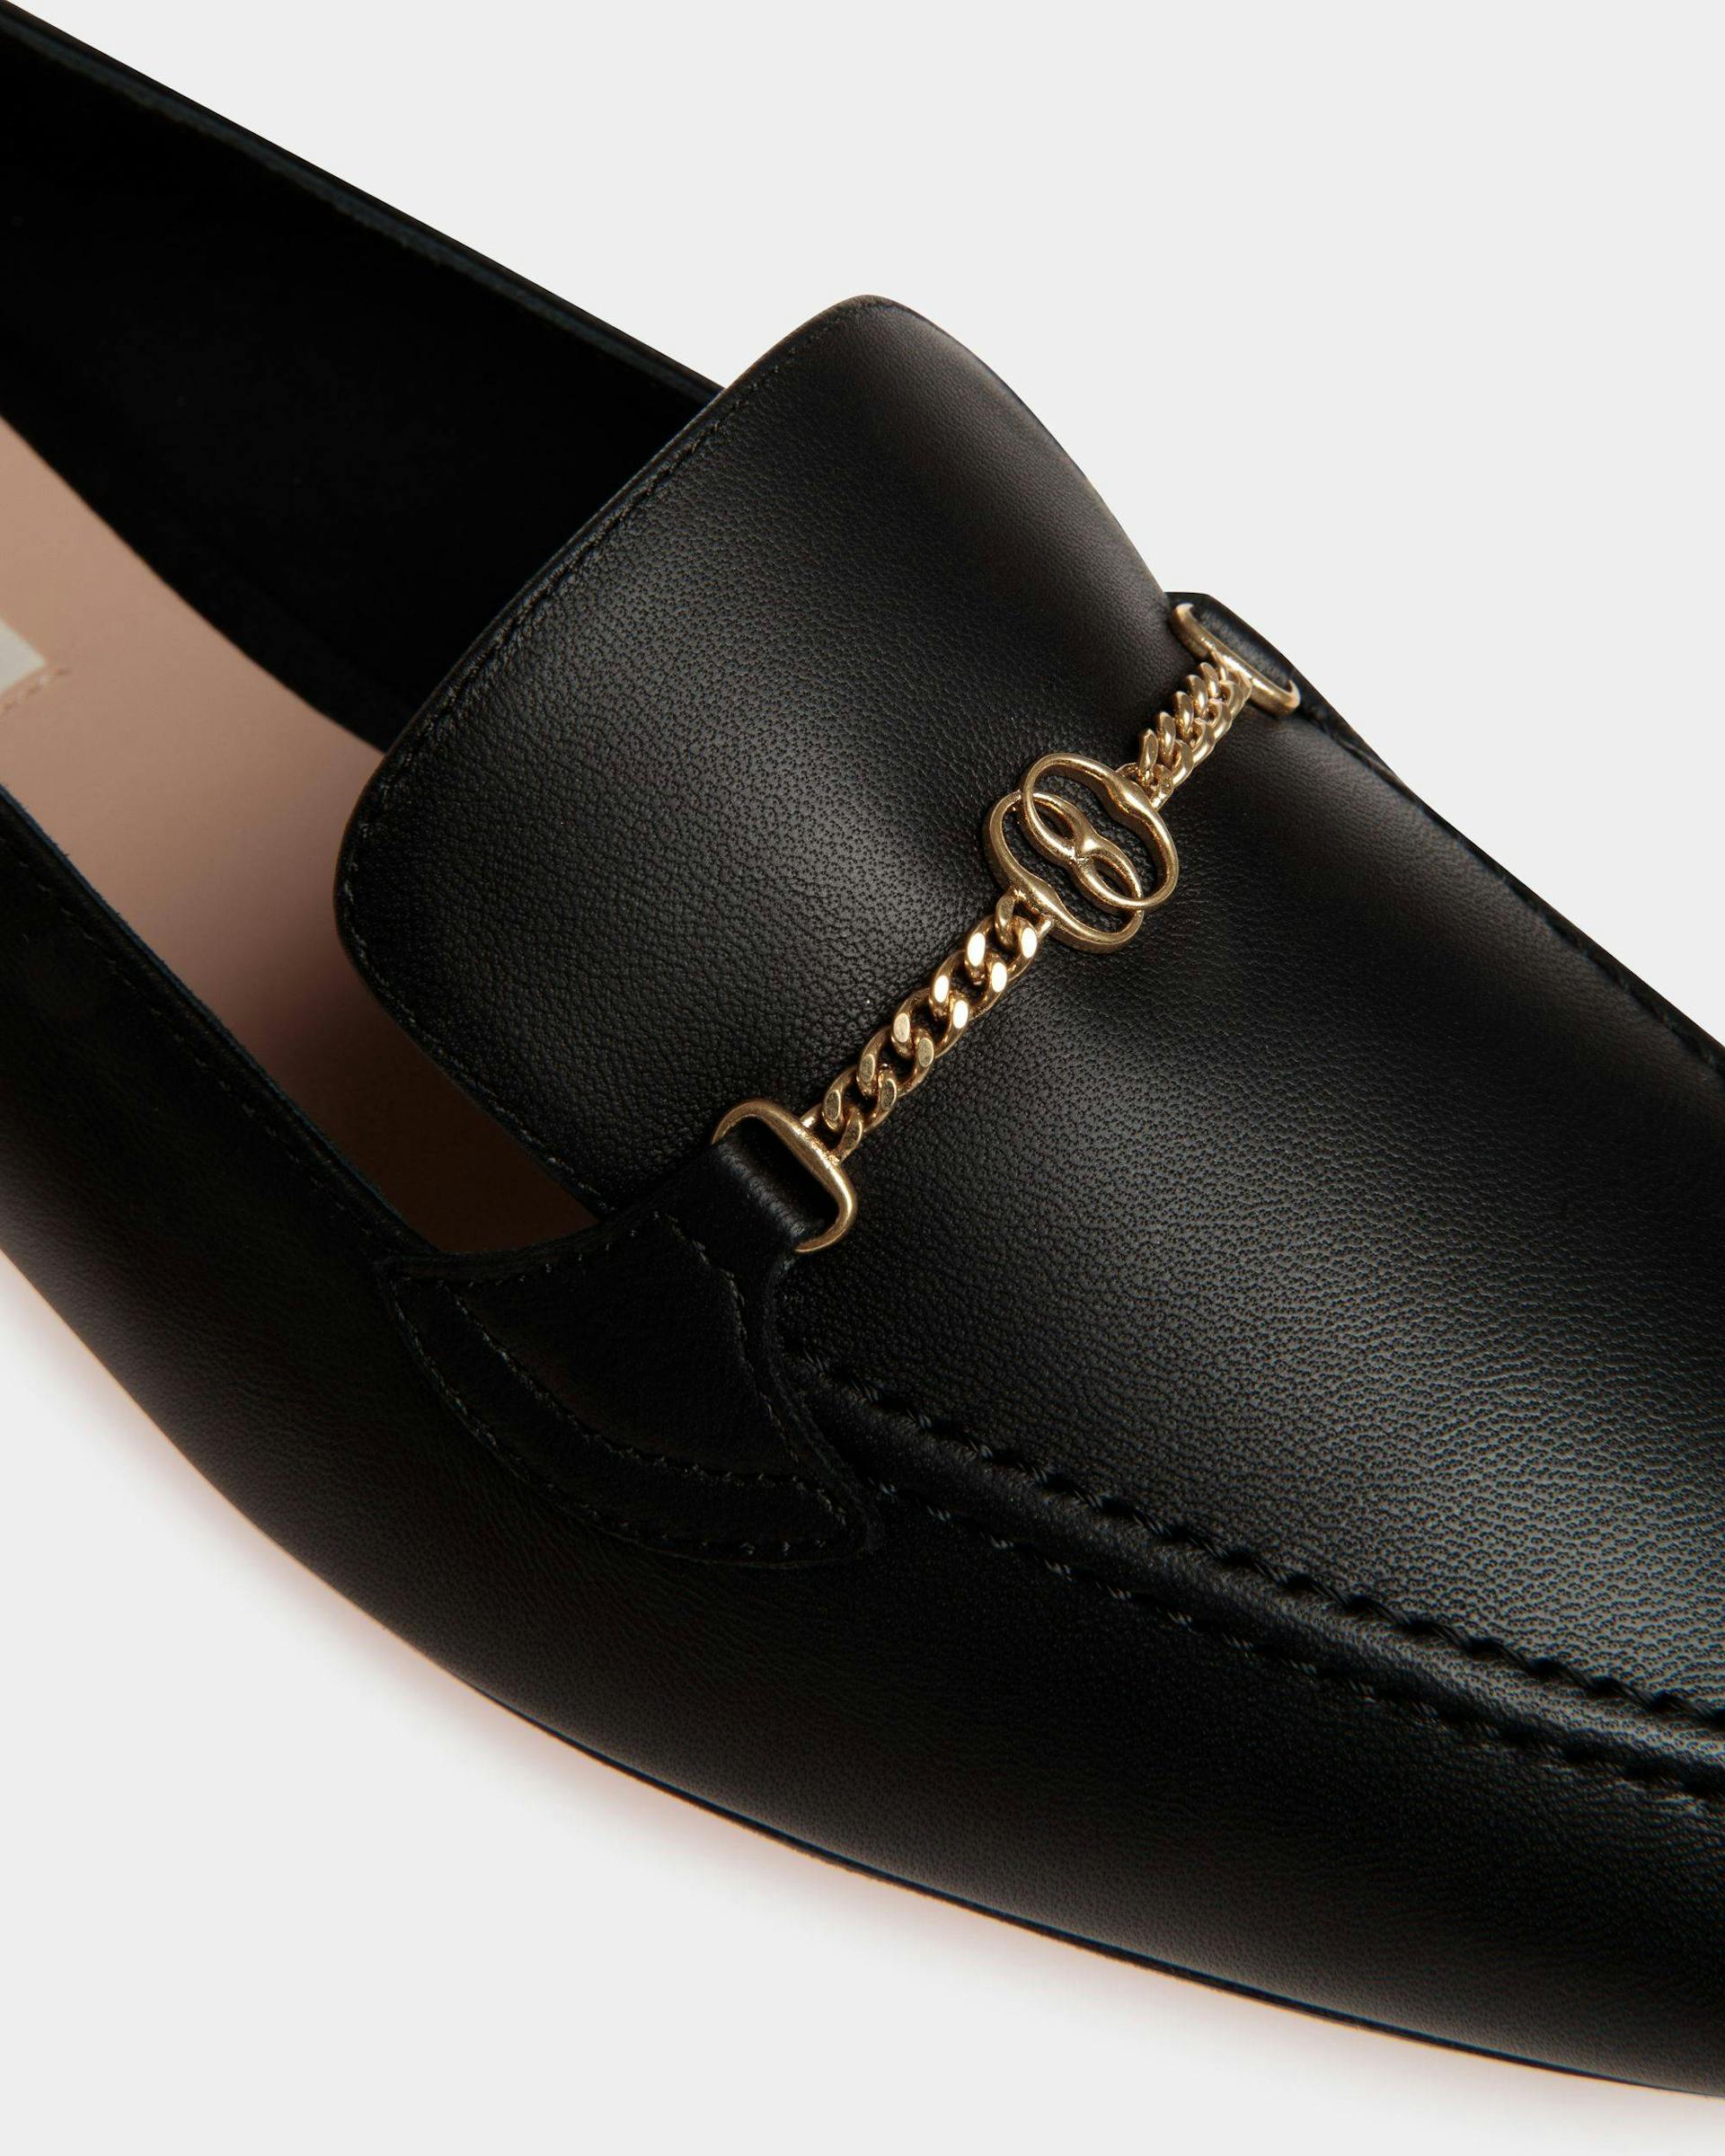 Women's Daily Emblem Loafer in Black Leather | Bally | Still Life Detail